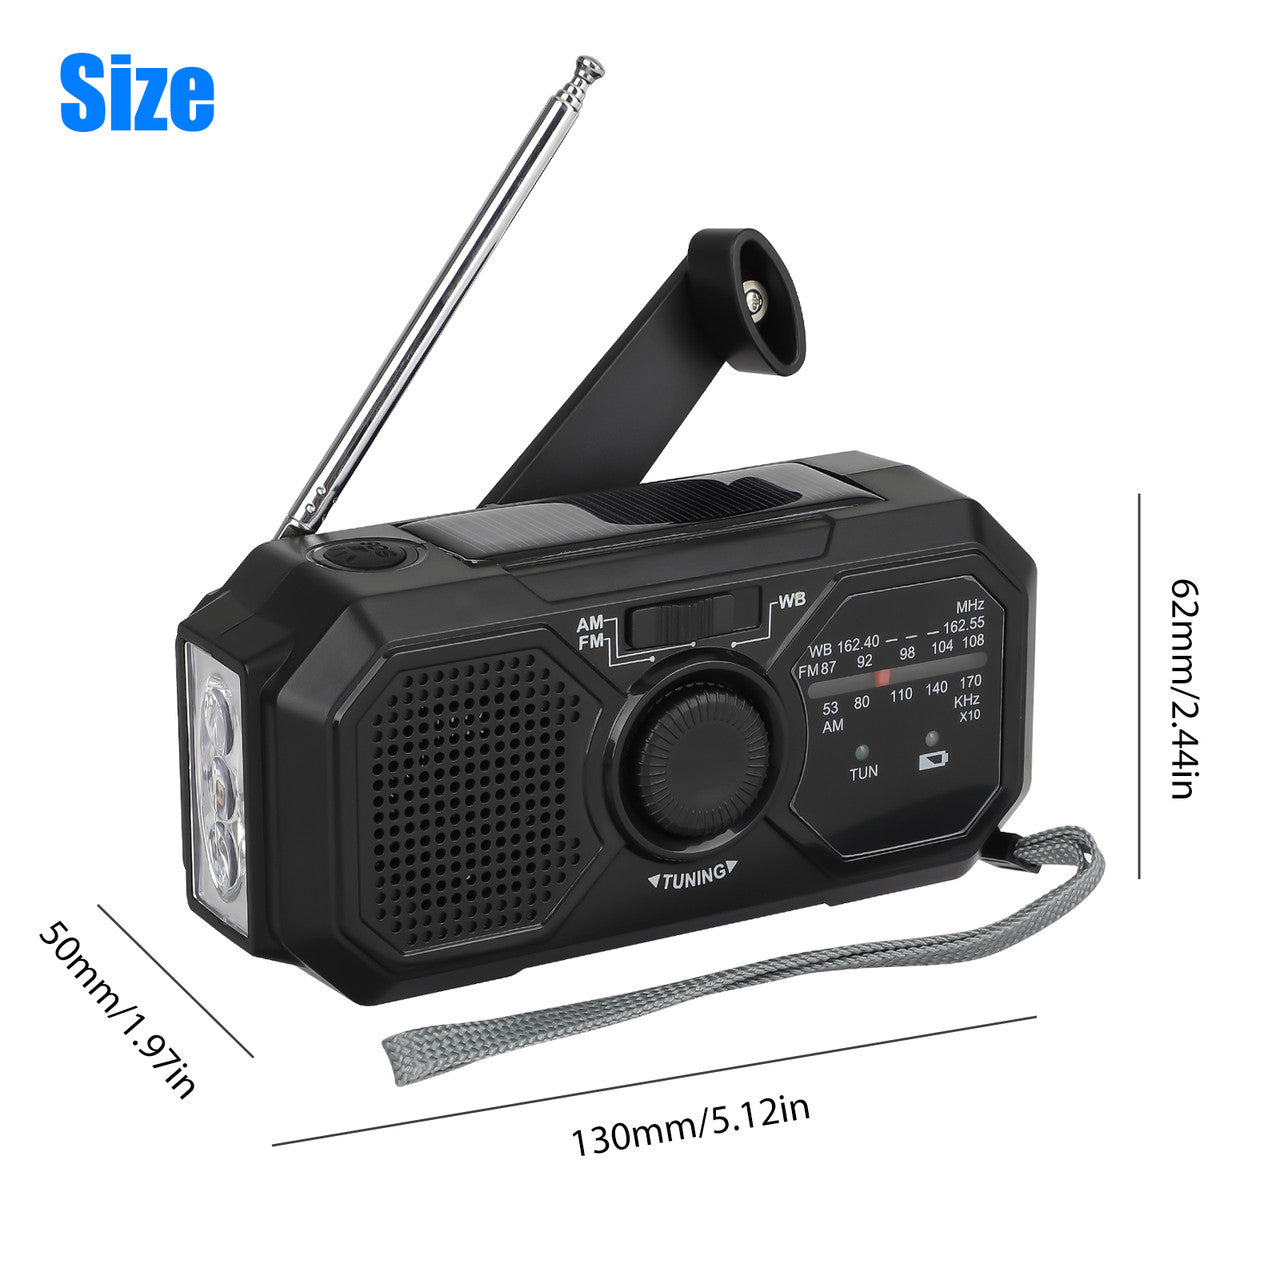 Emergency Solar Hand Crank Weather Radio with a Long Lasting Battery and Solar Charging